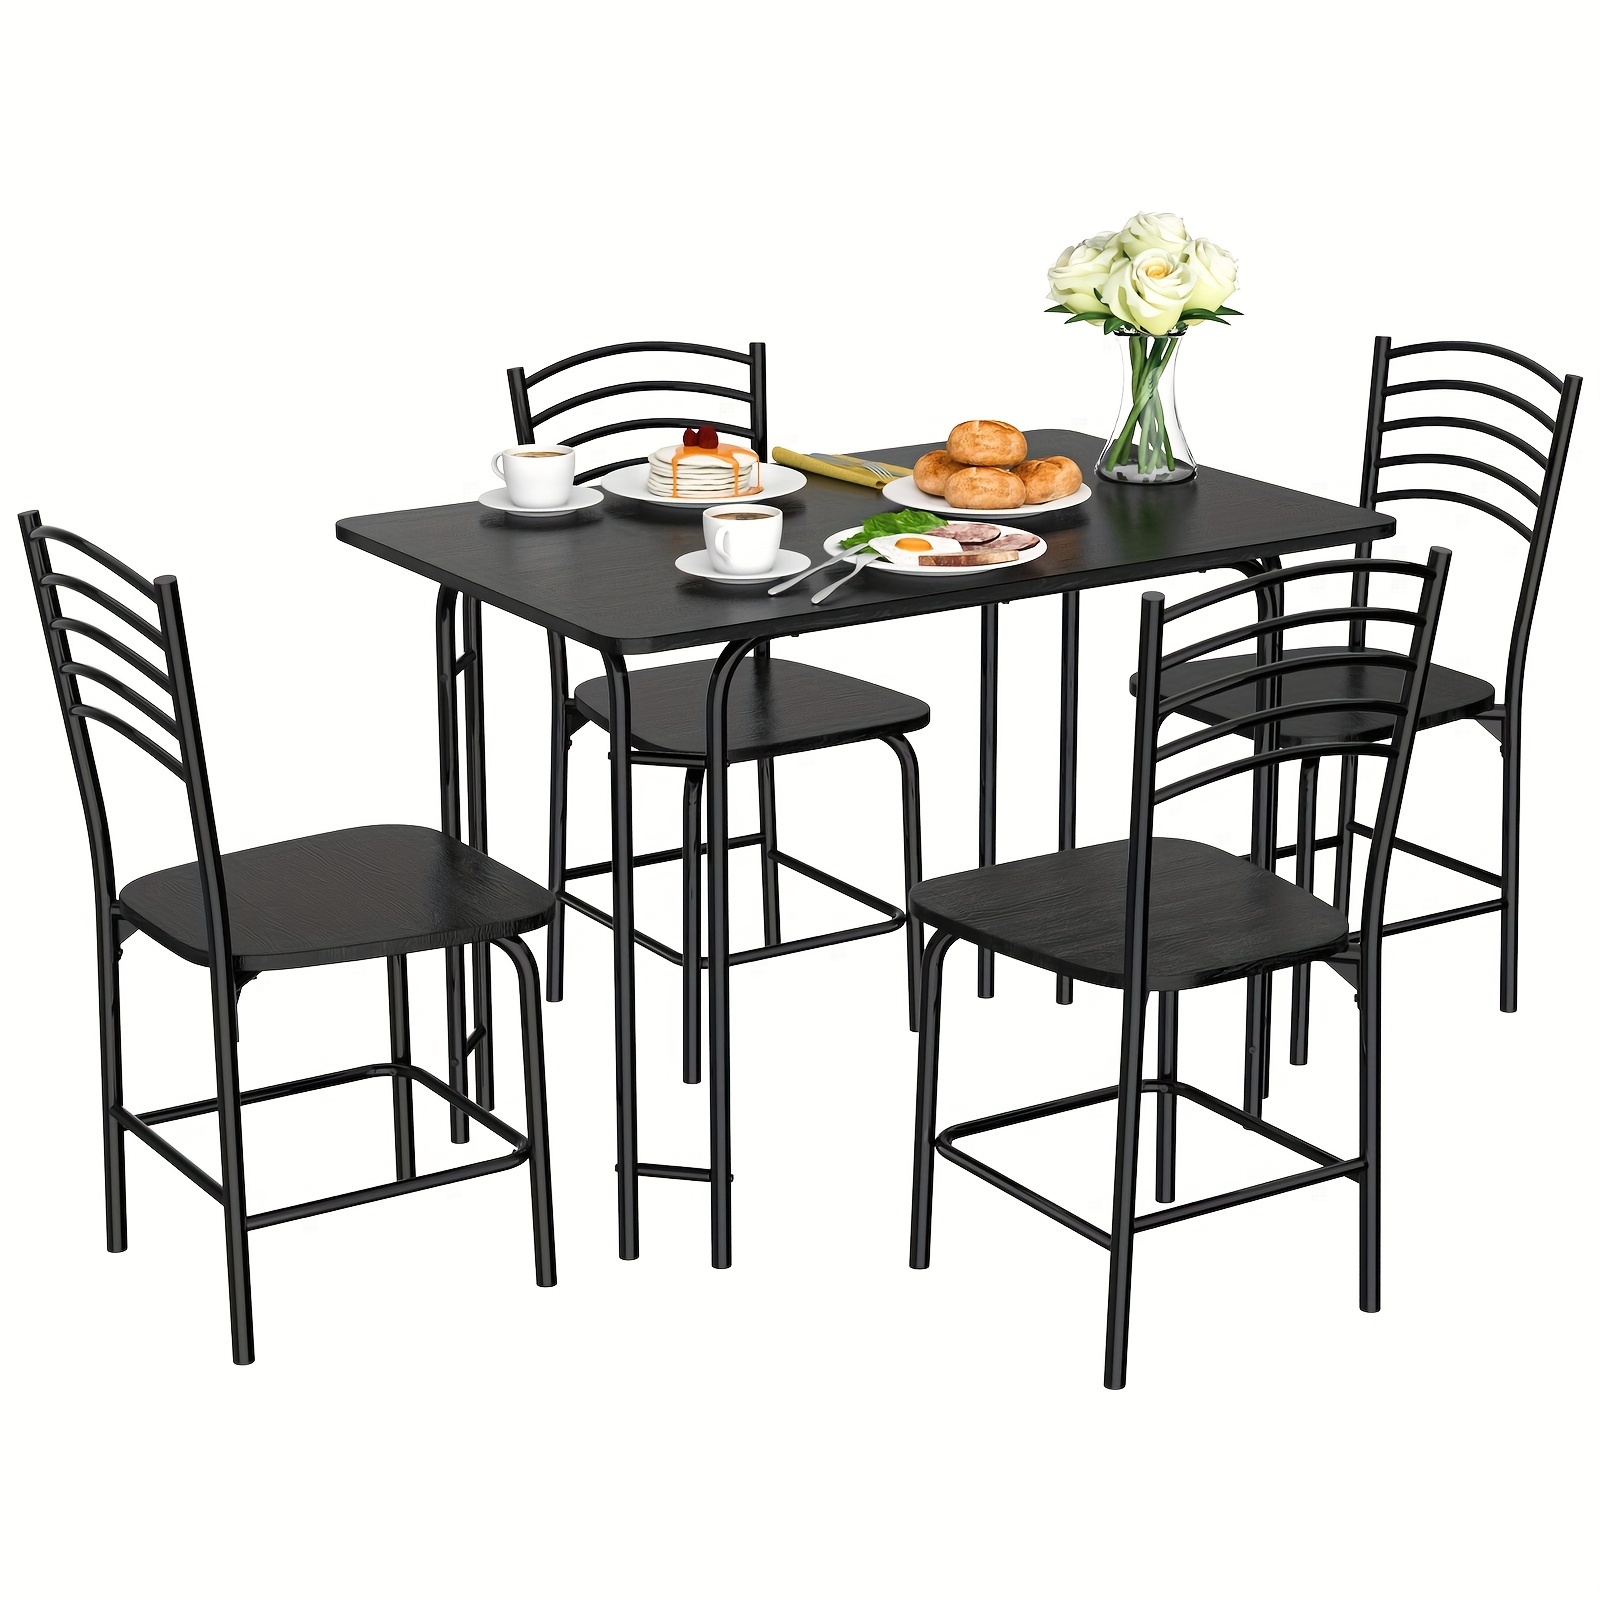 

5-piece Dining Set With Wood Textured Surface - Modern Classic Style Home Kitchen Table And 4 Chairs, Metal Legs, Sturdy Structure, Large Table Top For Comfortable Seating (black)